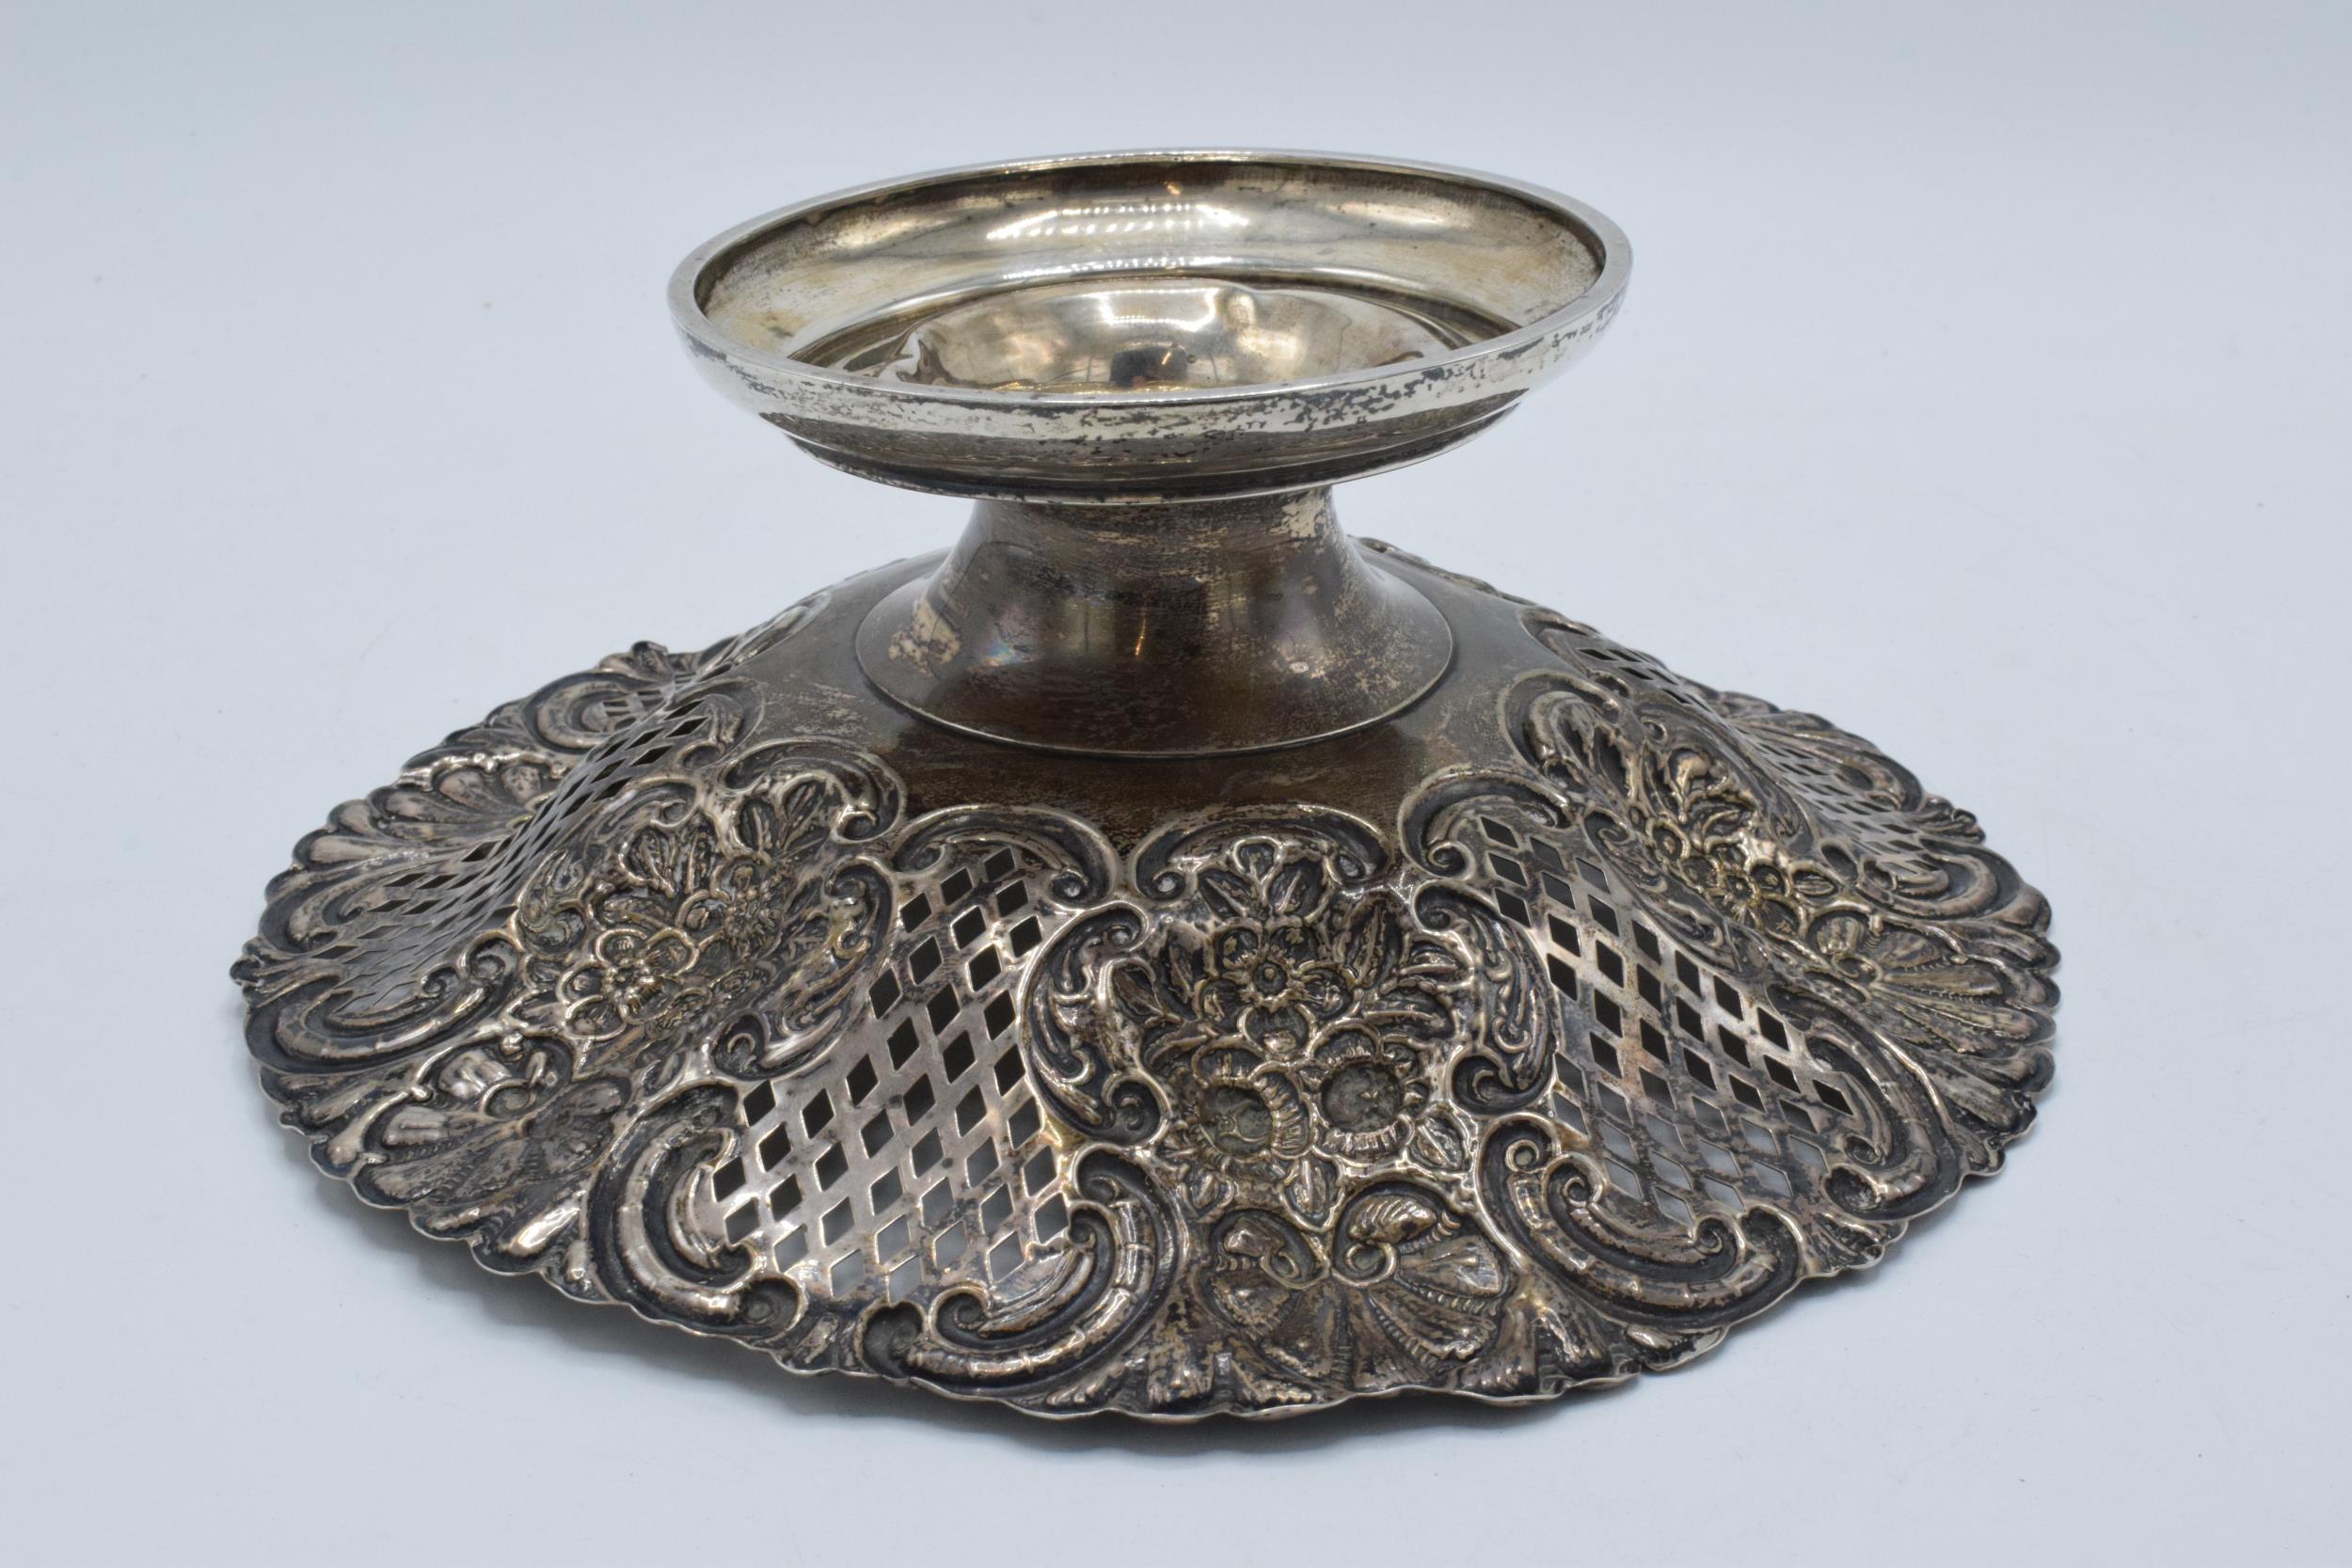 A silver pedestal dish with repousse decoration, Chester 1902, 272.2 grams. 23cm wide. - Image 2 of 4